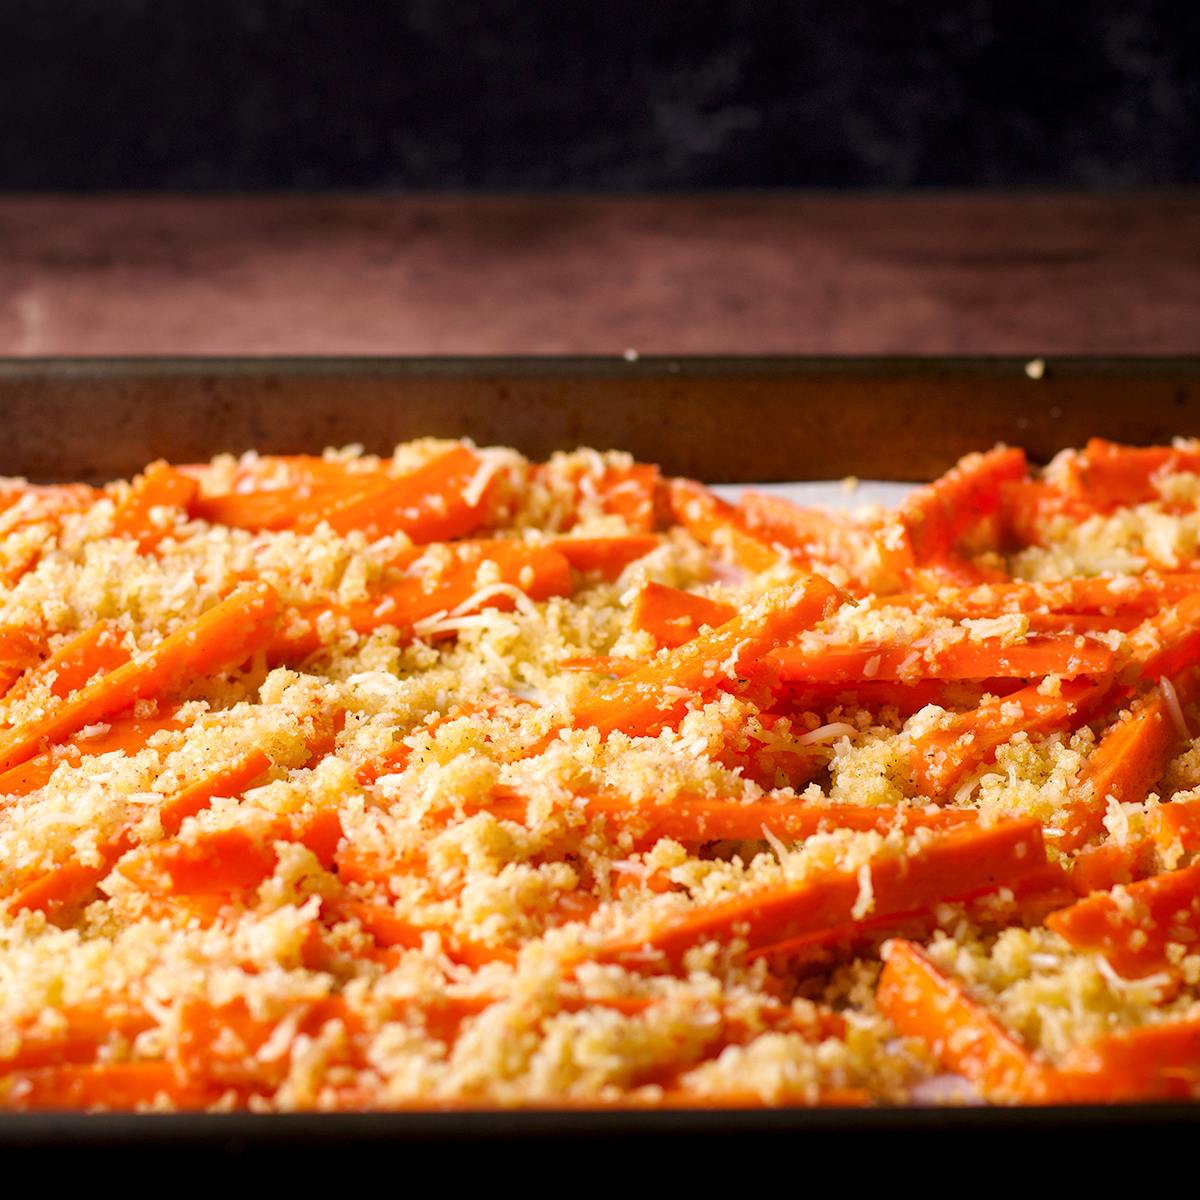 A baking tray filled with carrot fries that are ready to be baked.